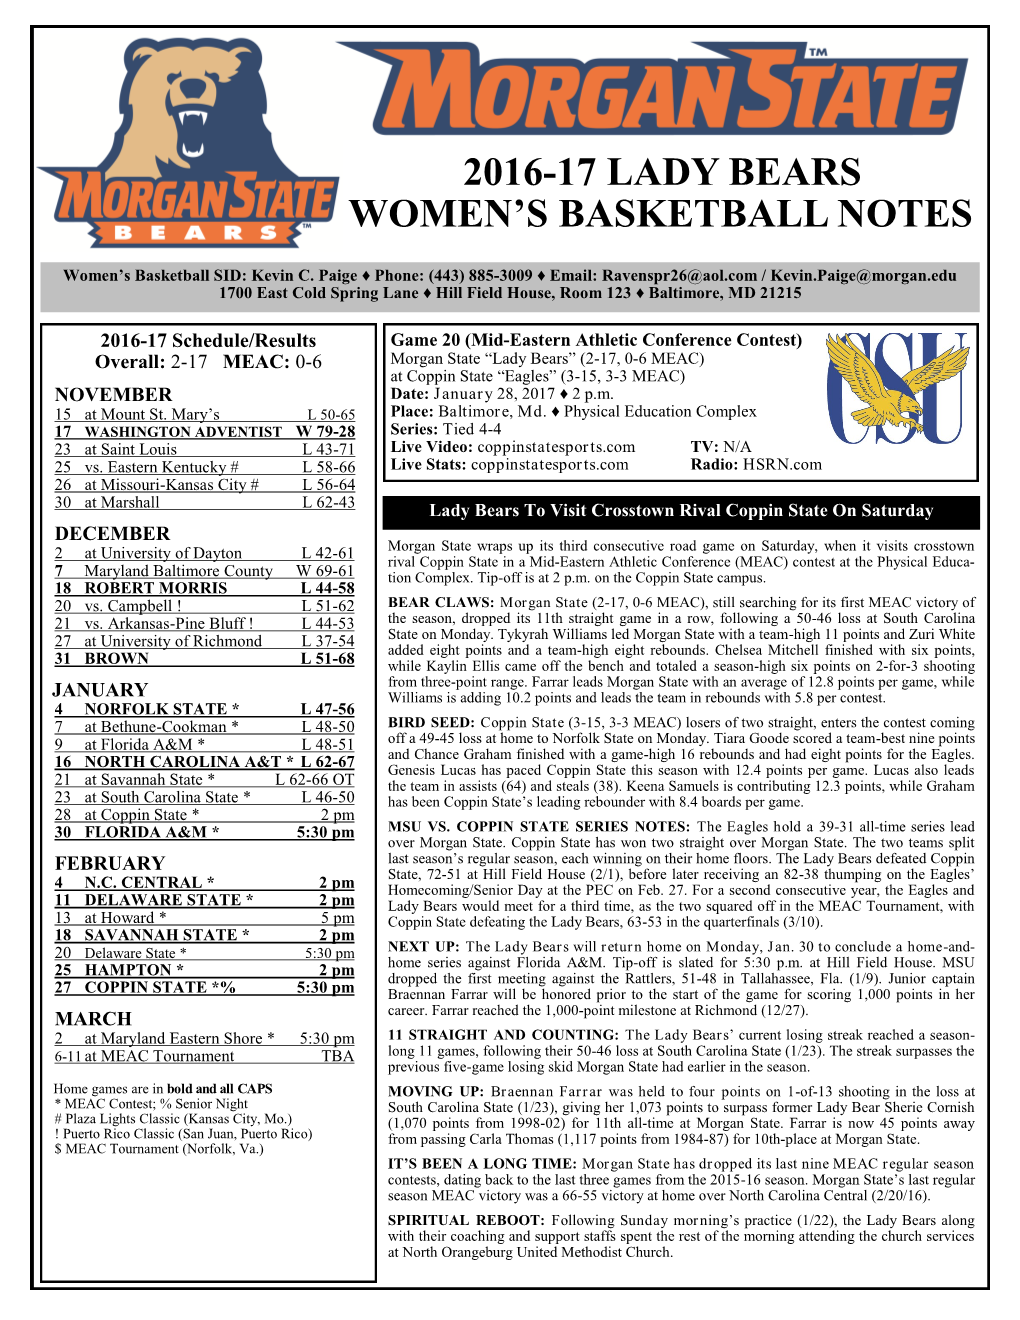 2016-17 Lady Bears Women's Basketball Notes